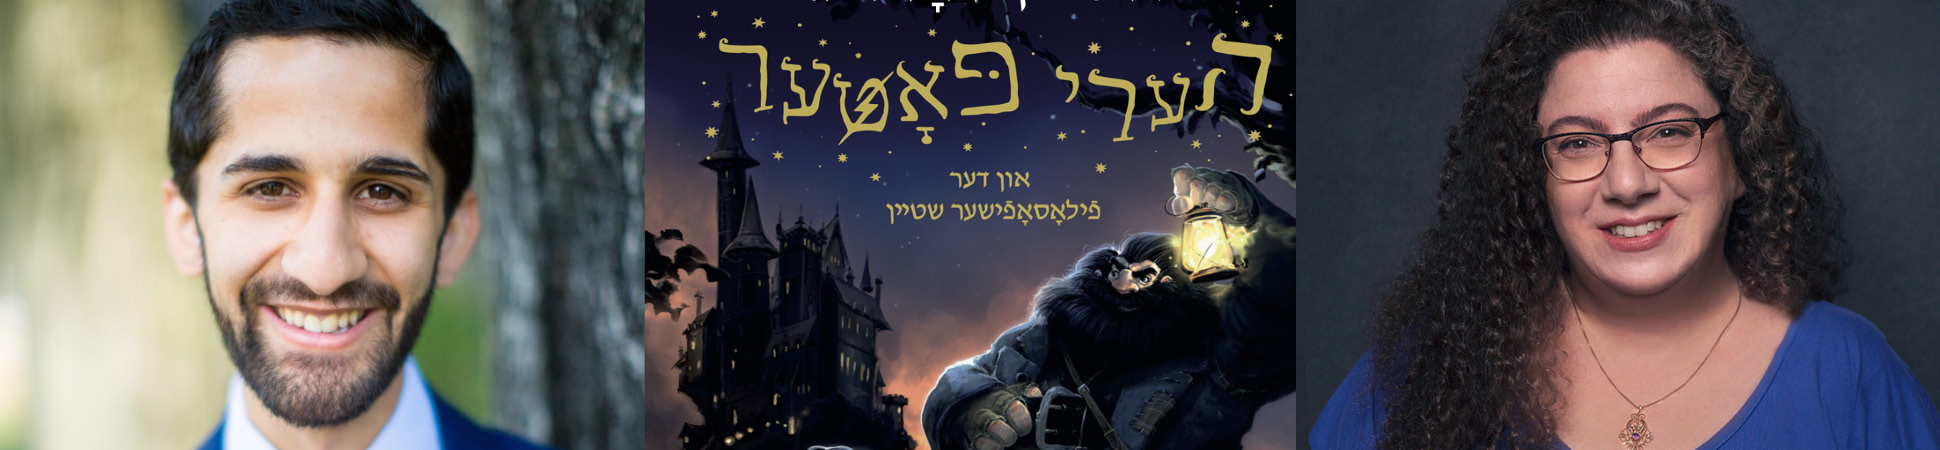 Magic in Mame-Loshn: on ‘Harry Potter’ in Yiddish